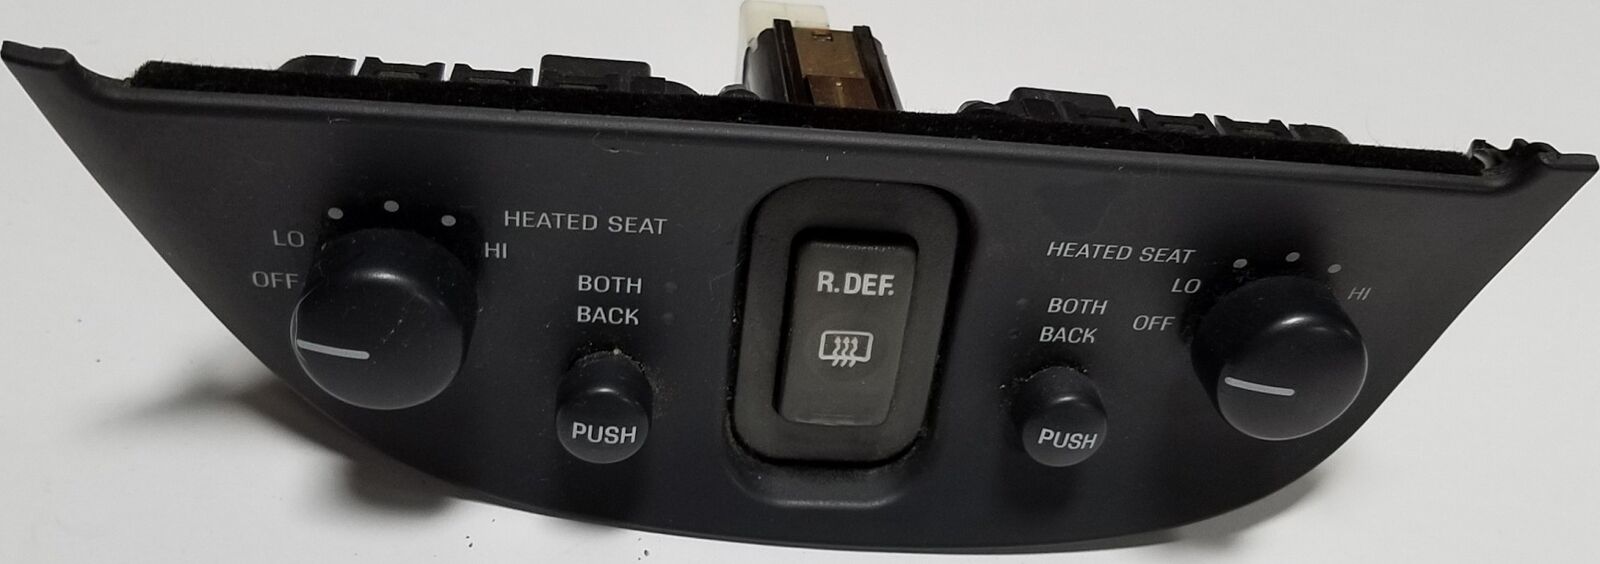 1997 1998 Lincoln Mark VIII Seat Heat Control with Defrost Switch Assembly